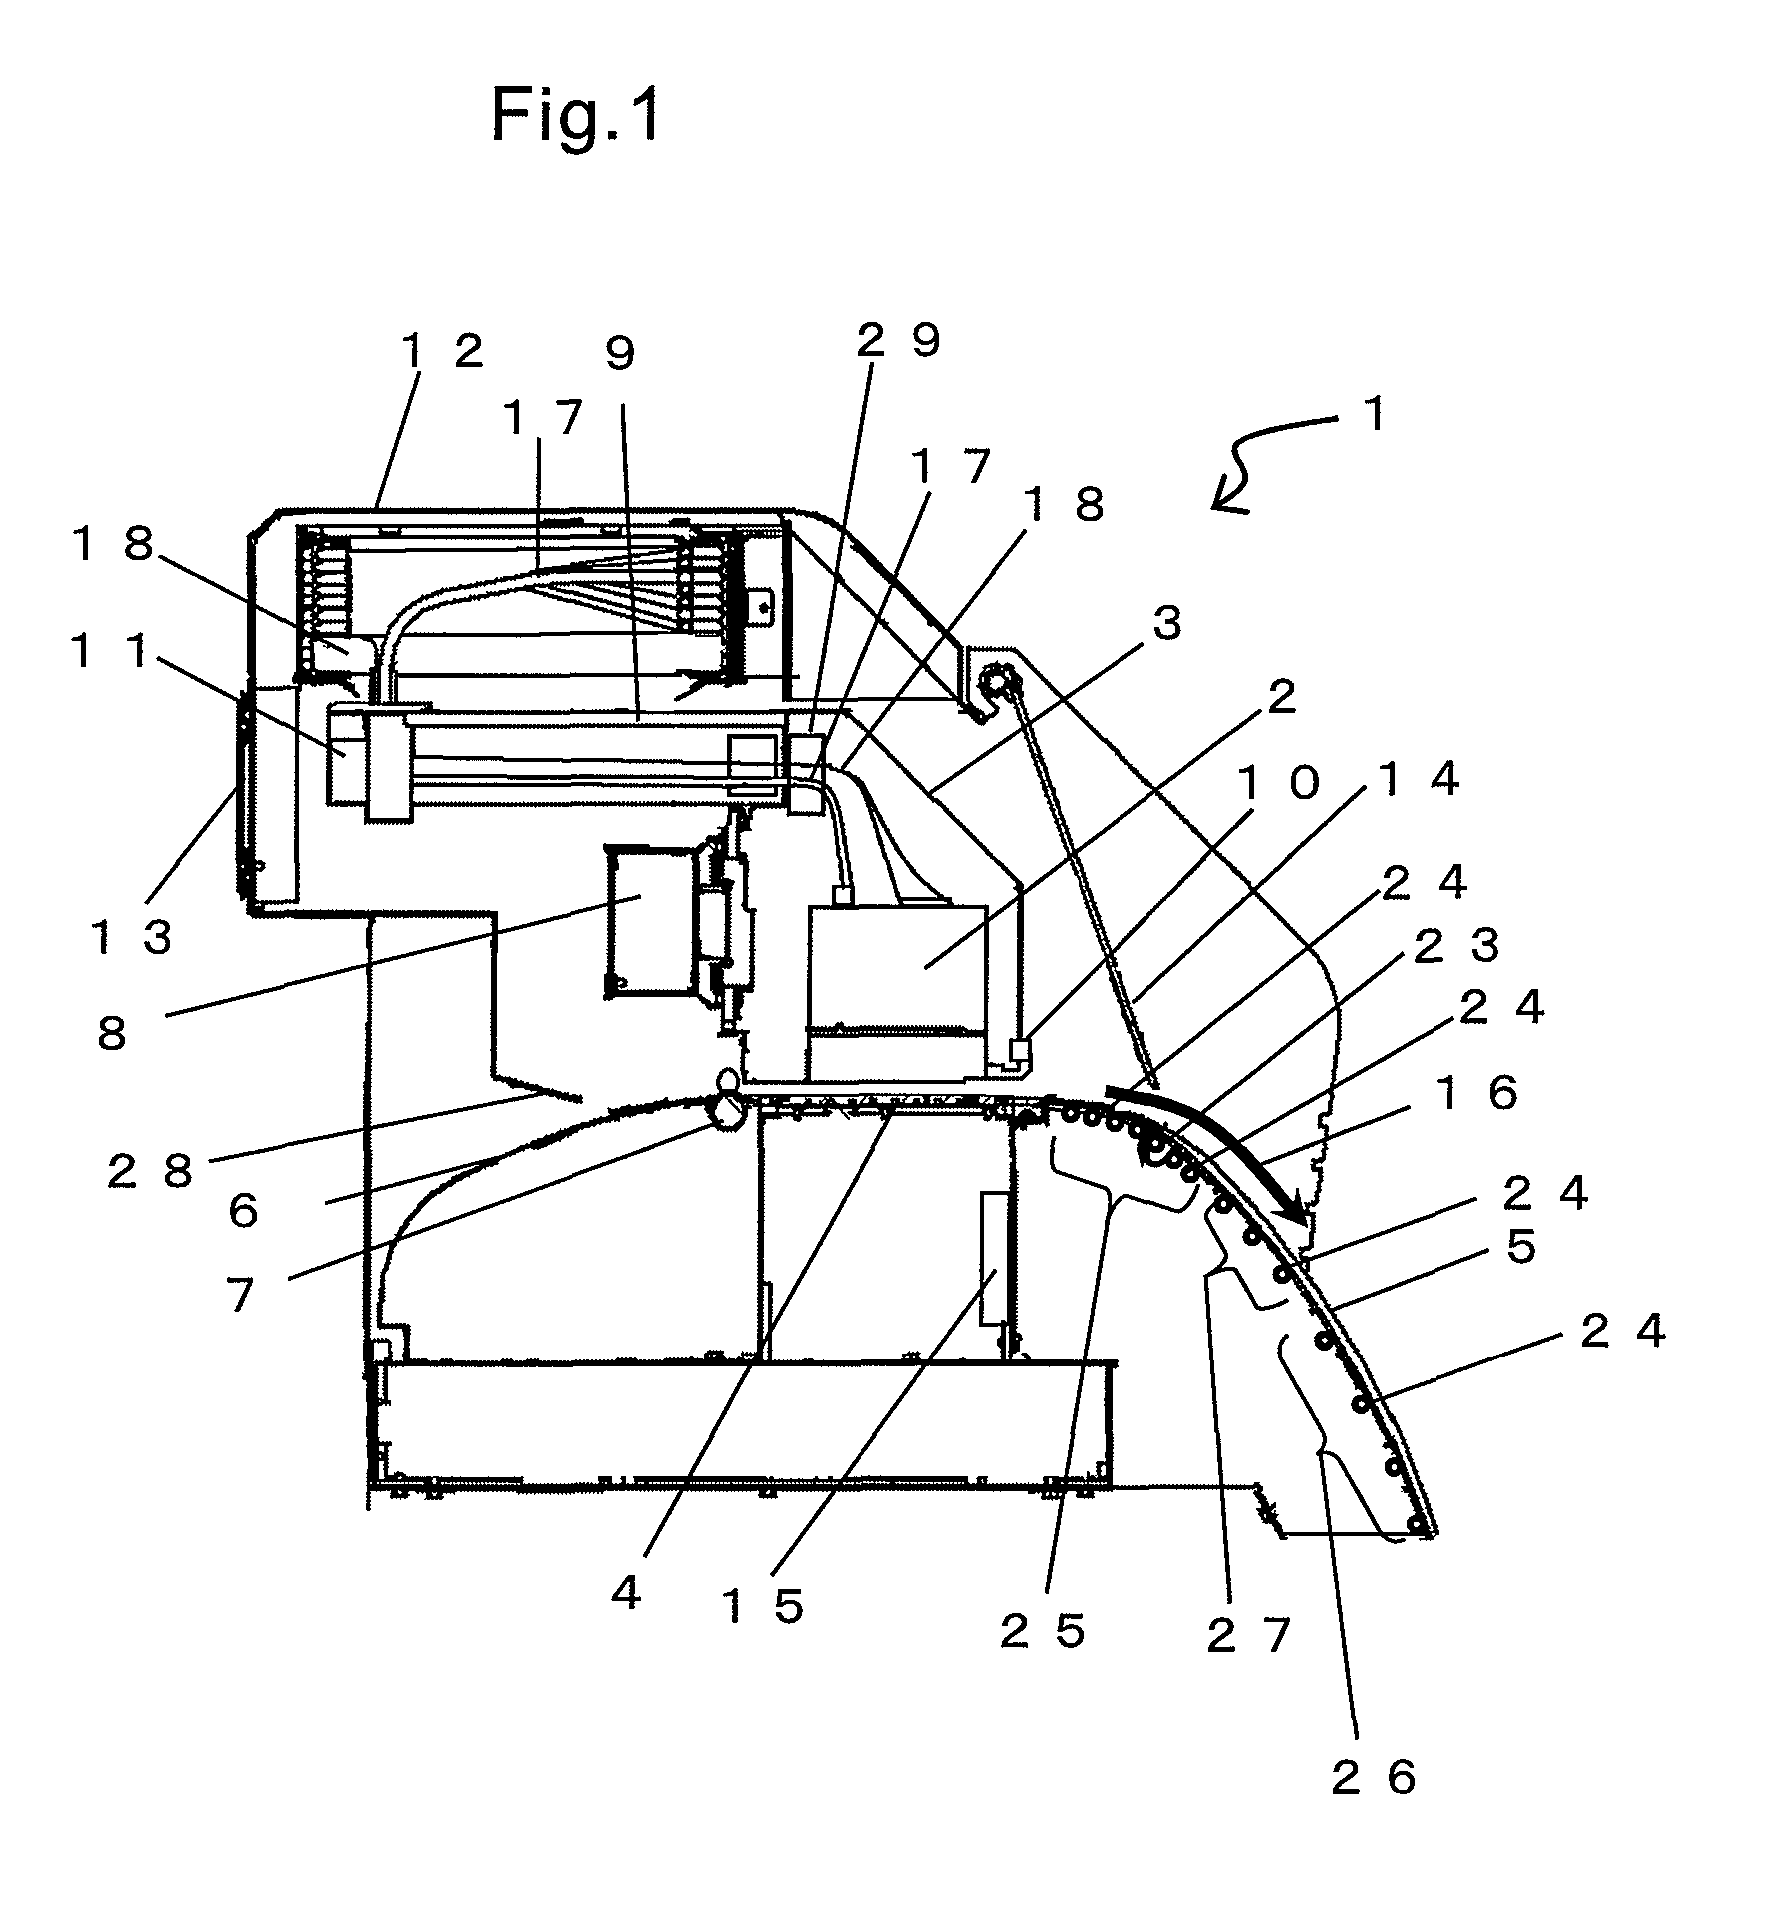 Inkjet printer with printed ink cooling mechanism